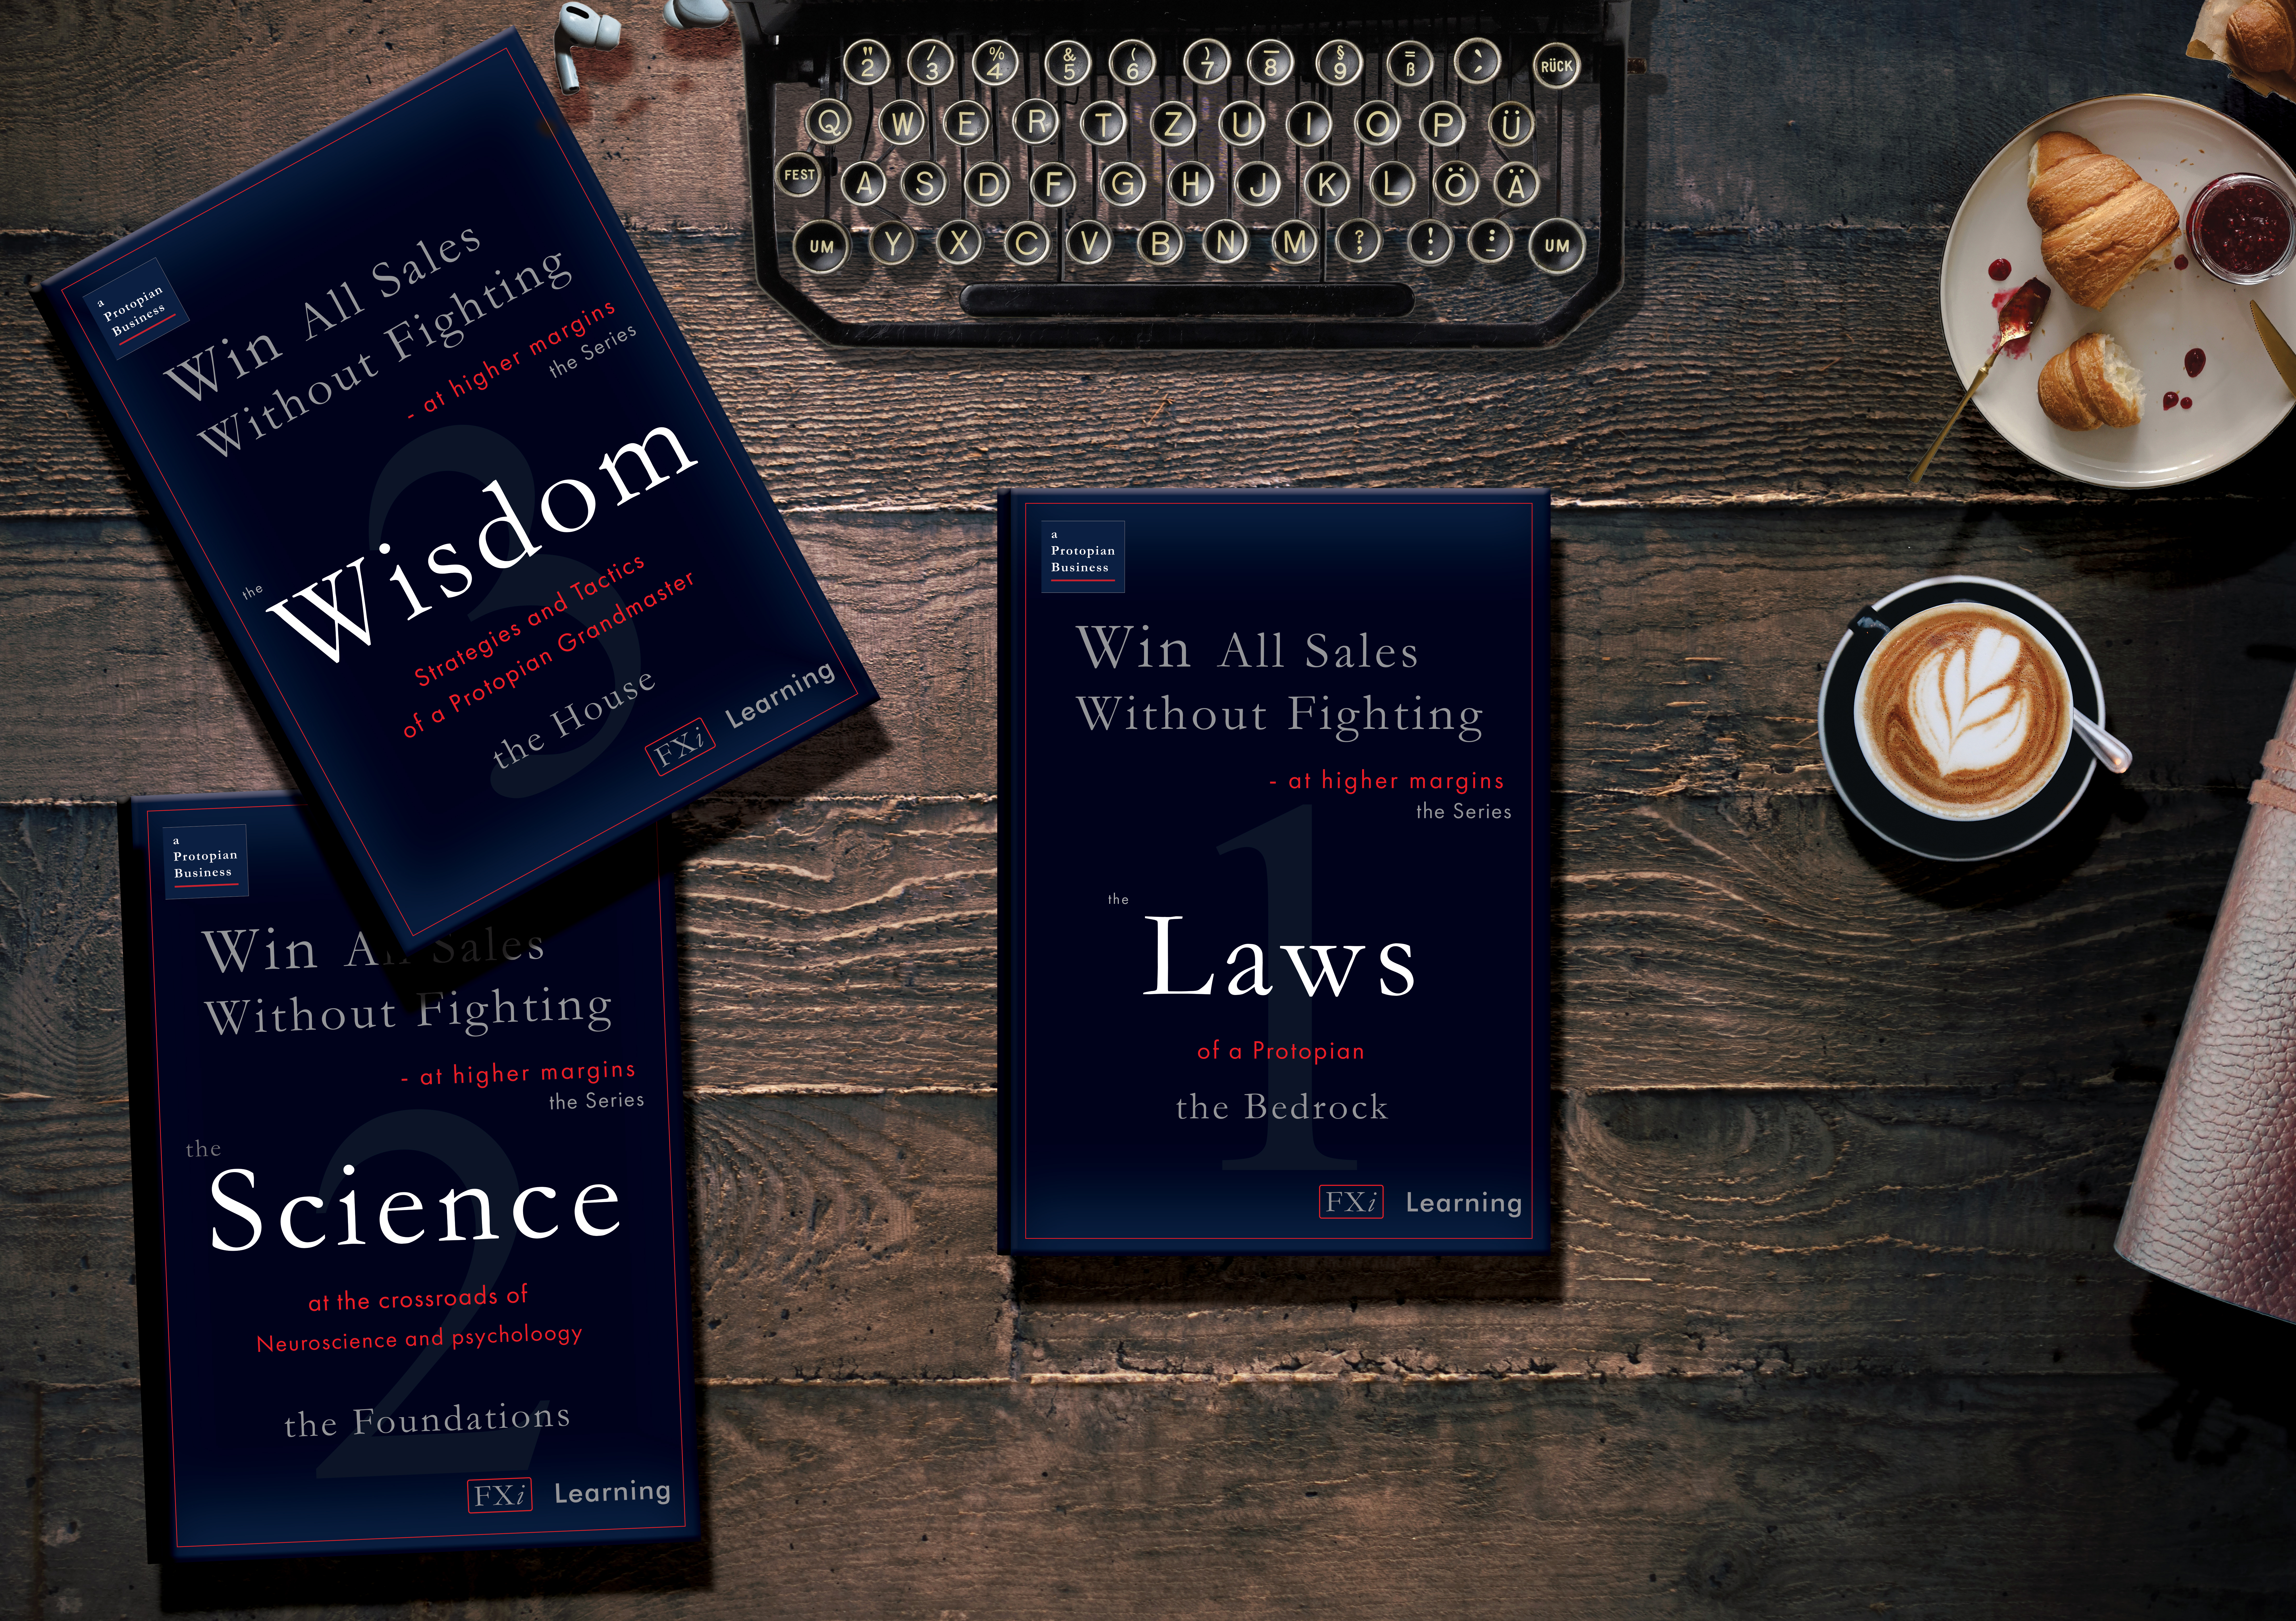 The last picture in the “free ebook” section is of the three books in the series “Win All Sales without fighting at higher margins. The background is an antique hardwood desk. There is an antique black cast metal typewriter top center, only showing the front part with all the keys. The first book, the Laws, is in the center of the screen; the second book, the Science, is bottom left, slightly turned to the left; the third book is placed at about 15 degrees to the left, and the bottom part is on top of the second book that is in the bottom left. There are a set of apple earbud headphones between the third book and the typewriter; a cappuccino with a flower design in the foam is on the right side—a small teaspoon on the saucer, with dark blue trim. A partially eaten croissant on ta dish is above the cappuccino and slightly to the right. There is a small single-serving glass jar of jam and a  tiny spoon with strawberry jam on the plate. To the right is the edge of a leather-bound journal. The light source appears to be coming from an off-screen light on the left side of the typewriter at the top.